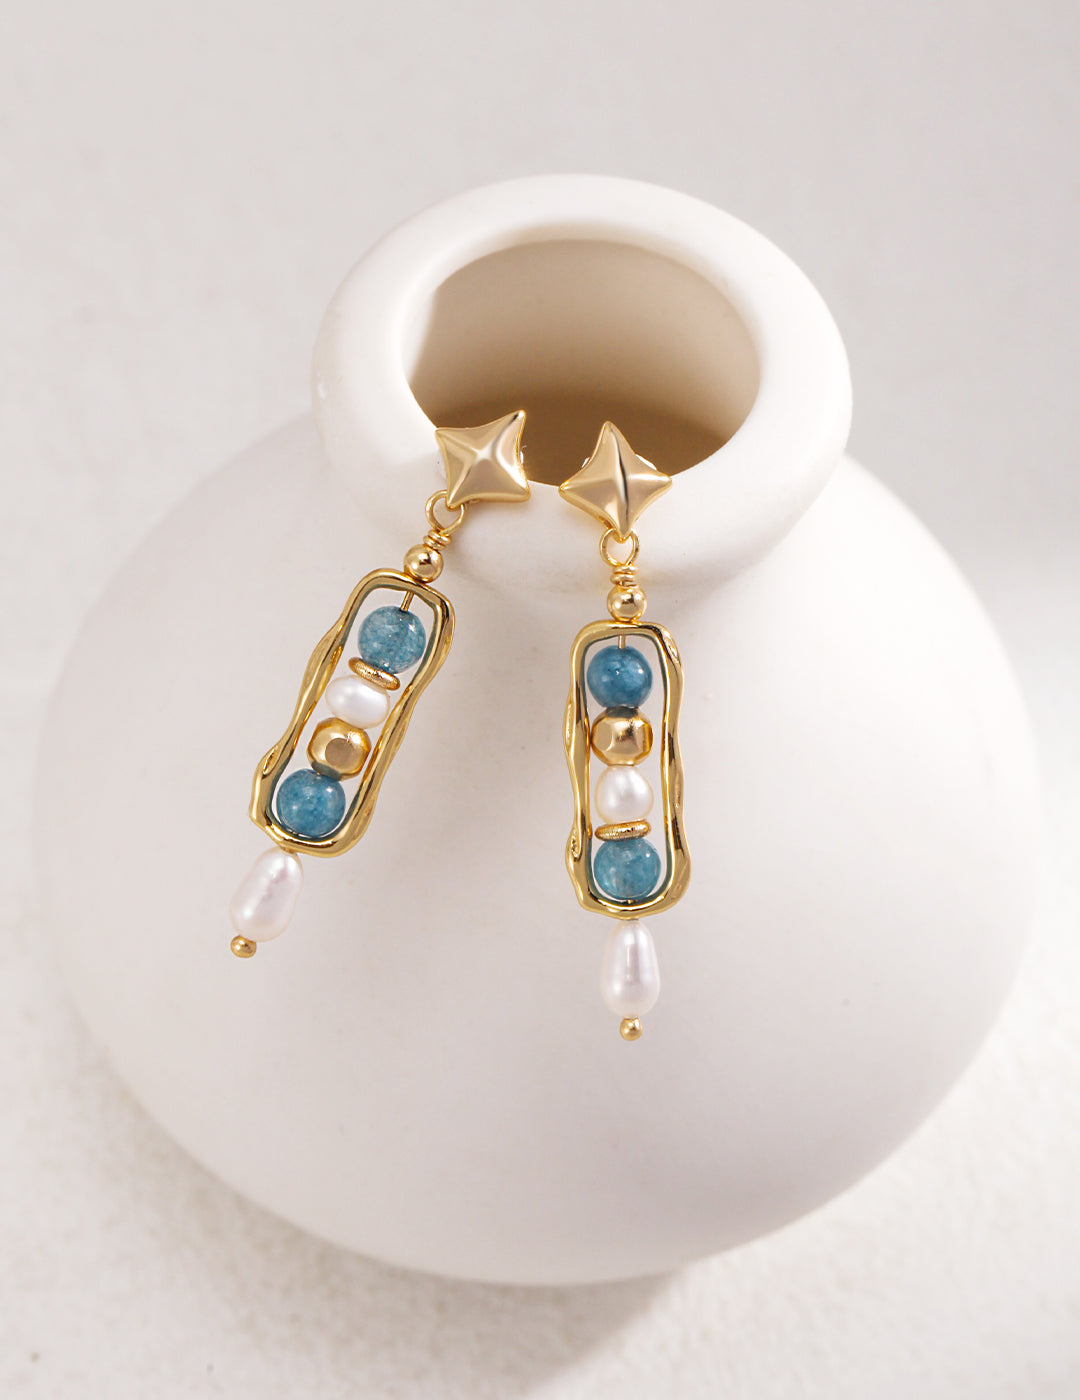 Mystical Fusion: Vintage Gold and Blue Earrings with White Pearls